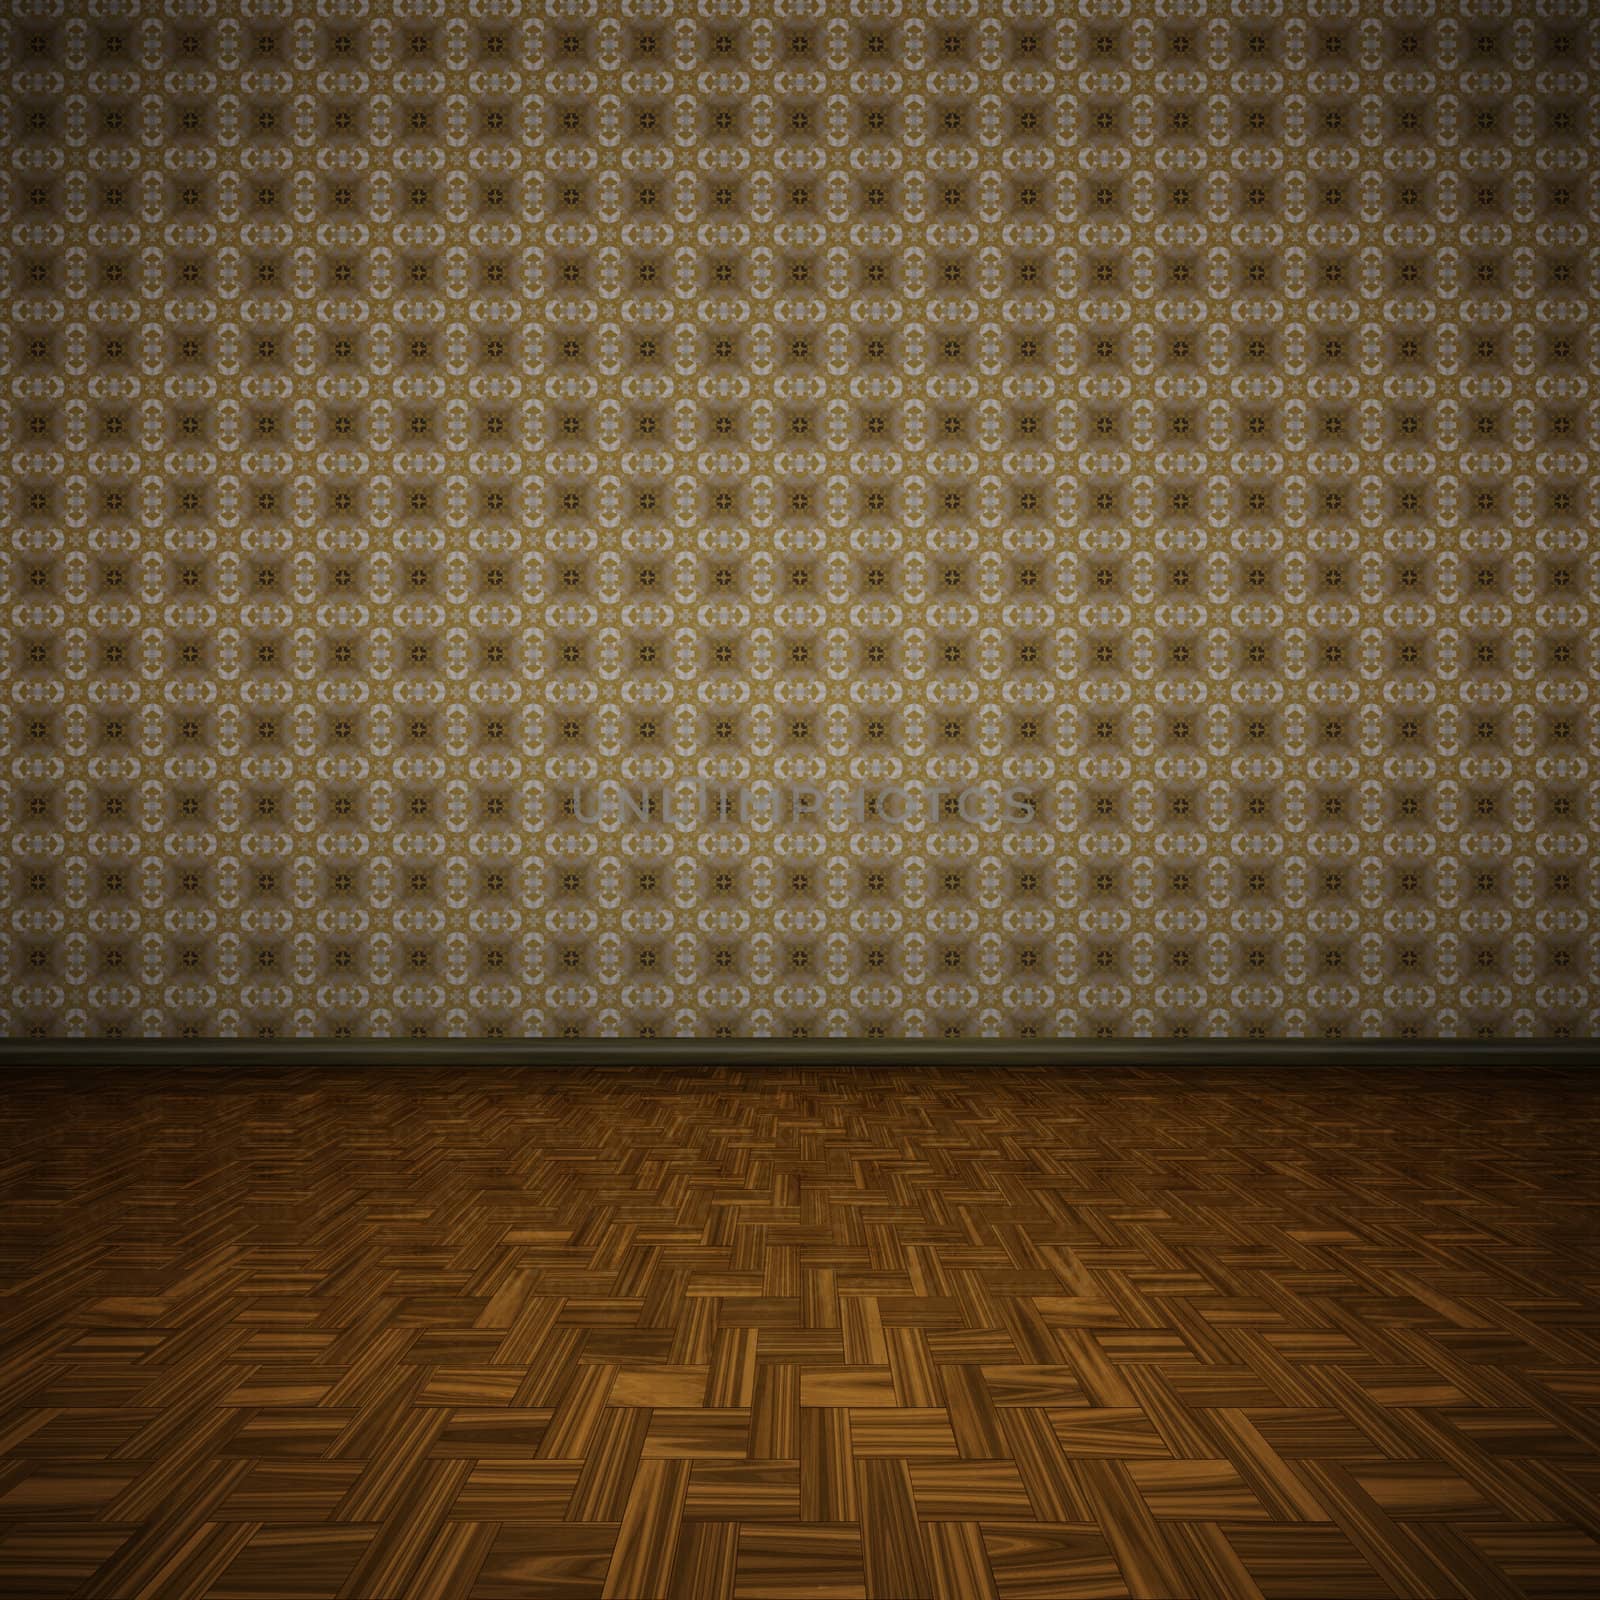 An image of a nice floor for your content